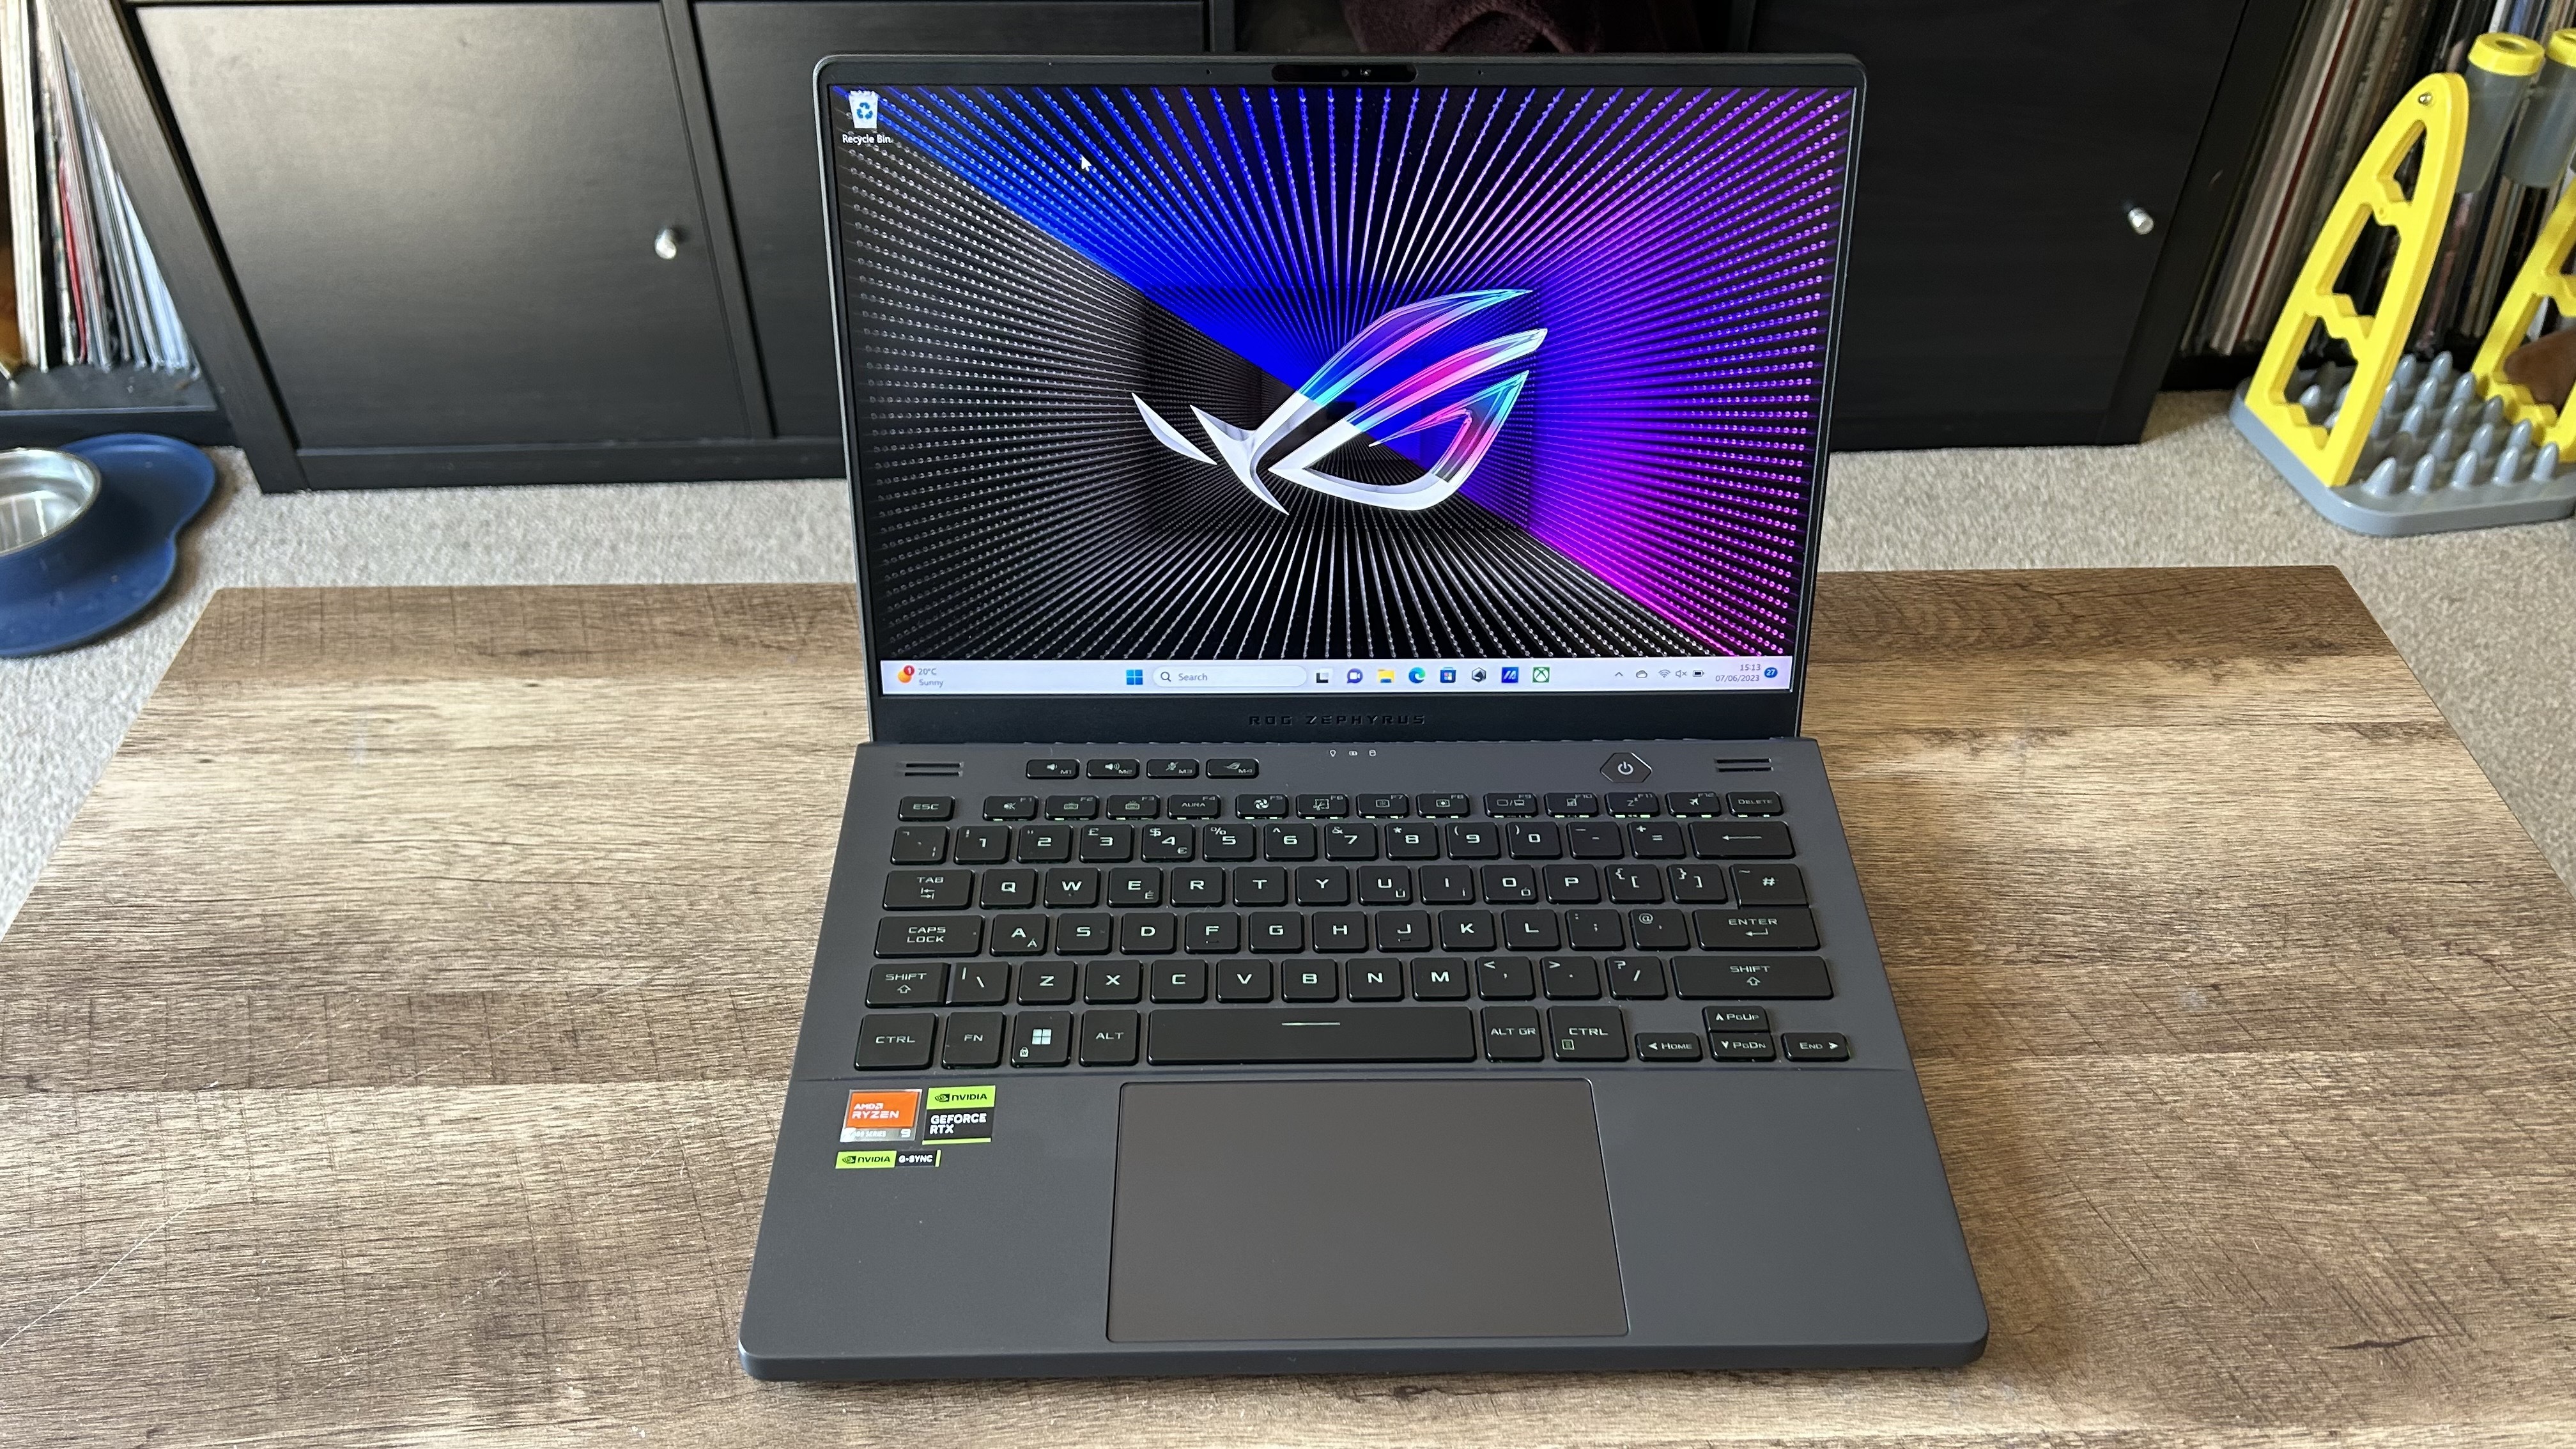 Asus ROG Zephyrus G14 (2022) review: Punching above its weight class